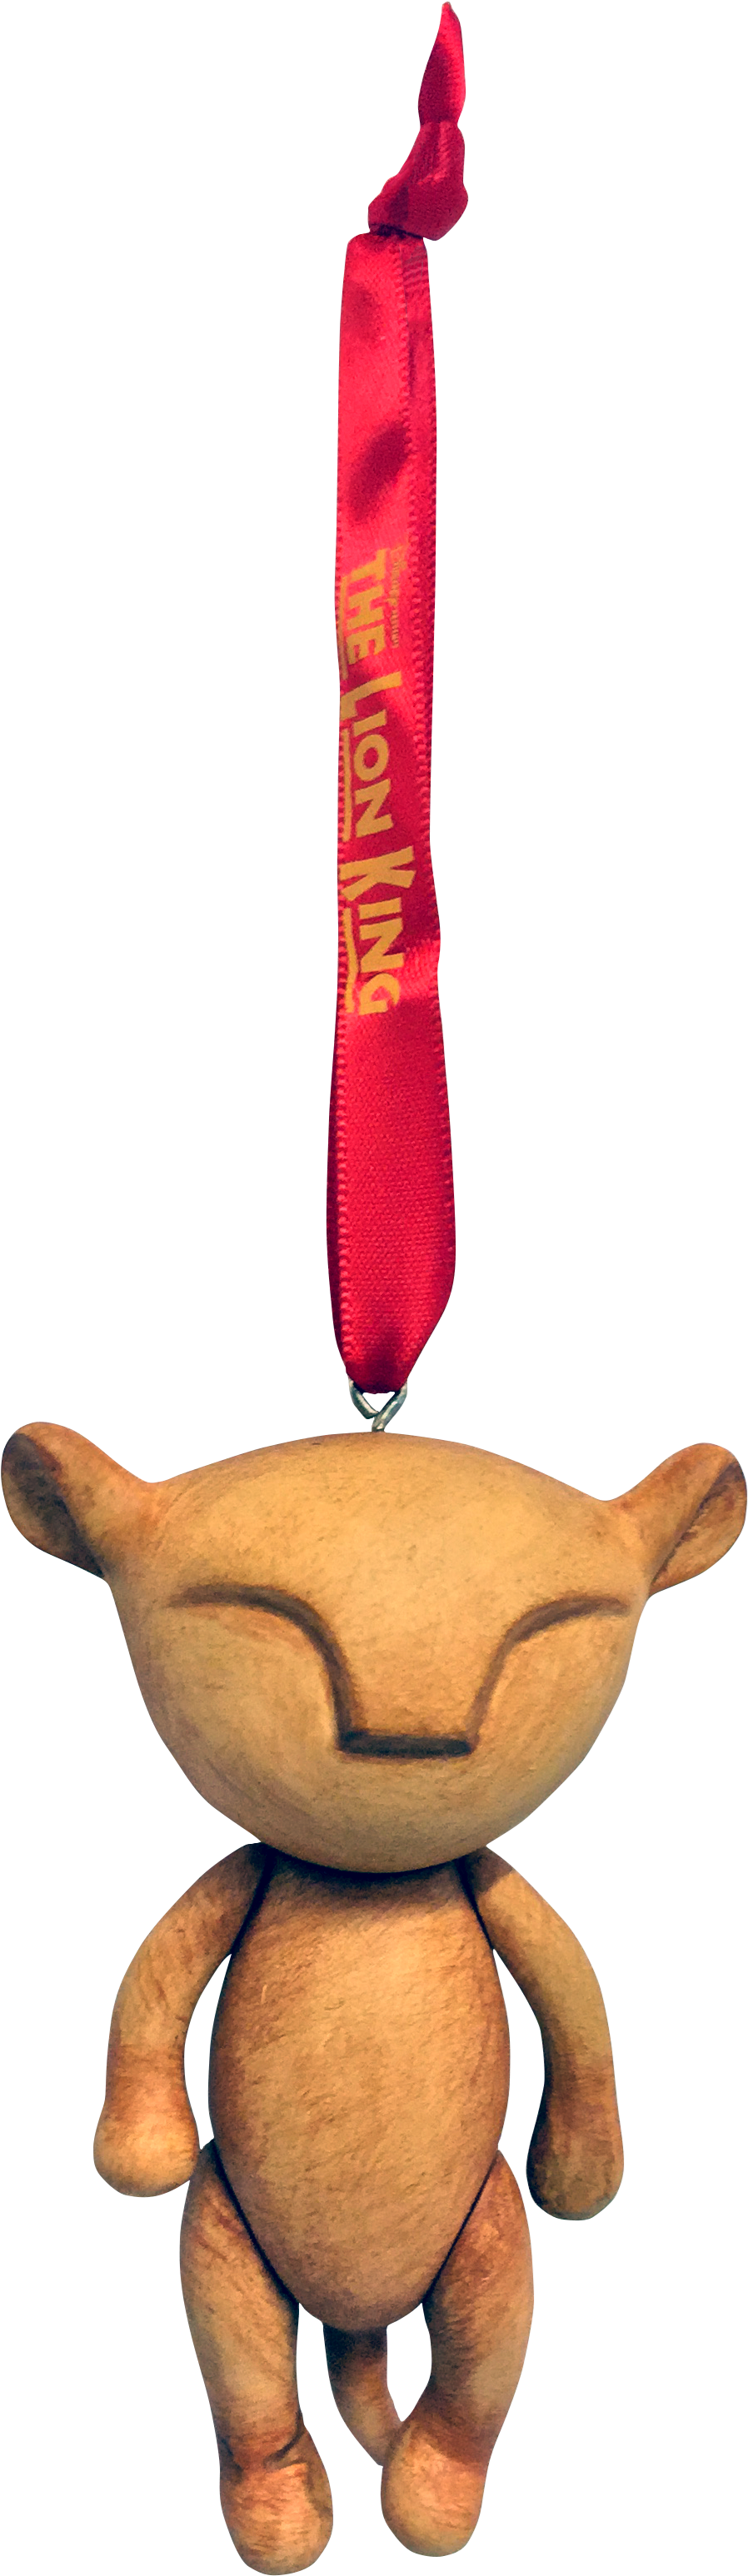 Lion King The Broadway Musical Baby Simba Ornament - The Lion King (2448x3264), Png Download